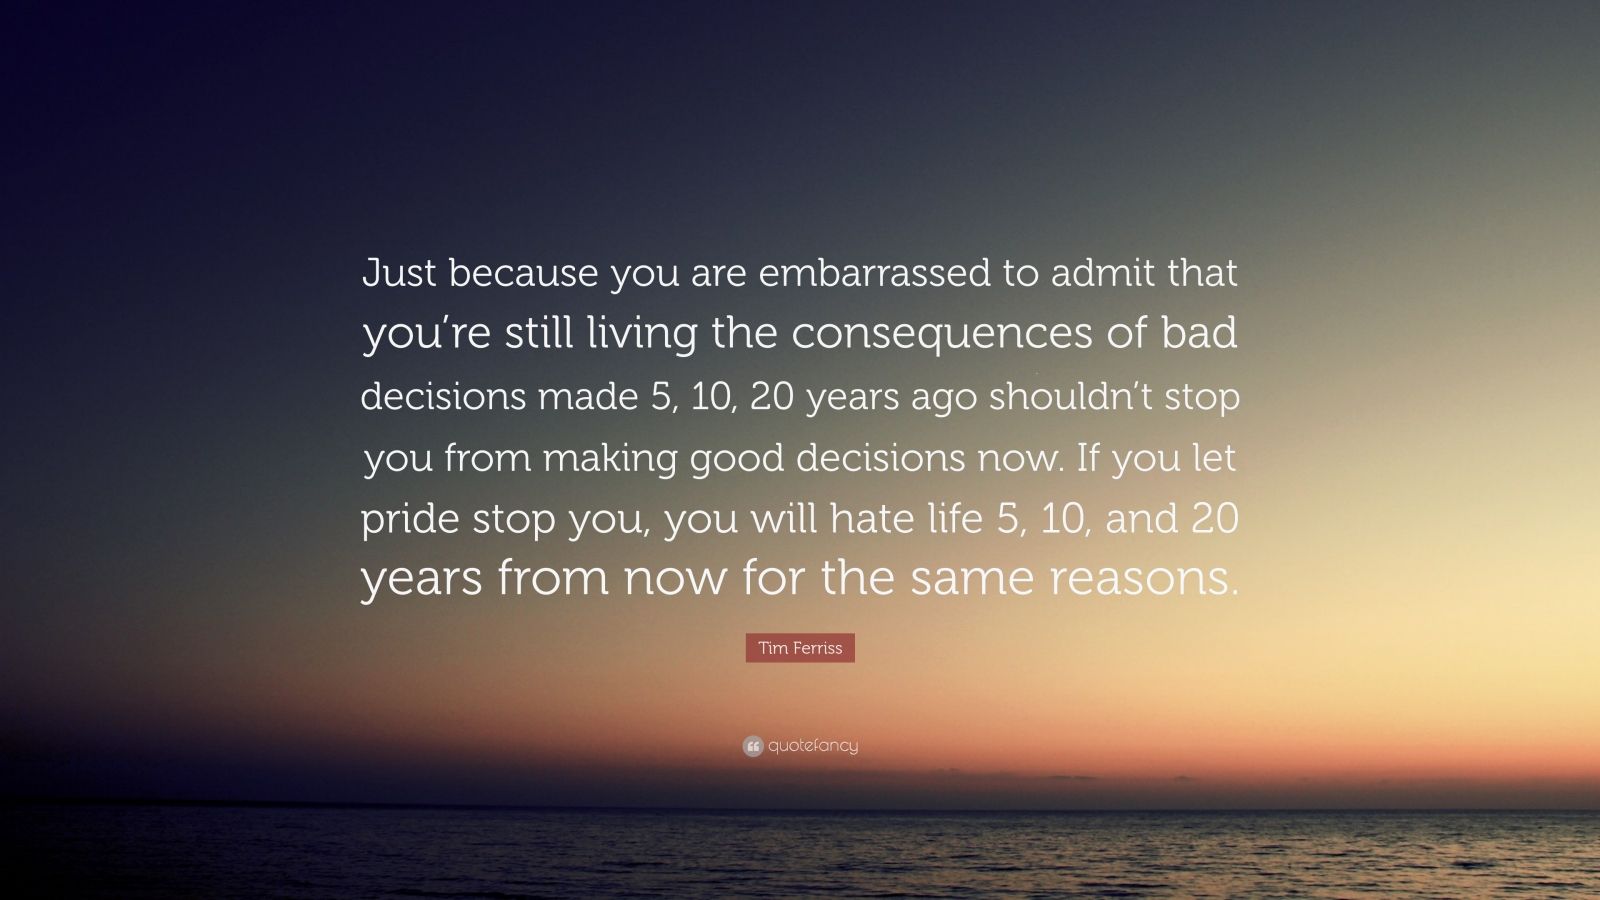 quotes about decisions and consequences by famous people